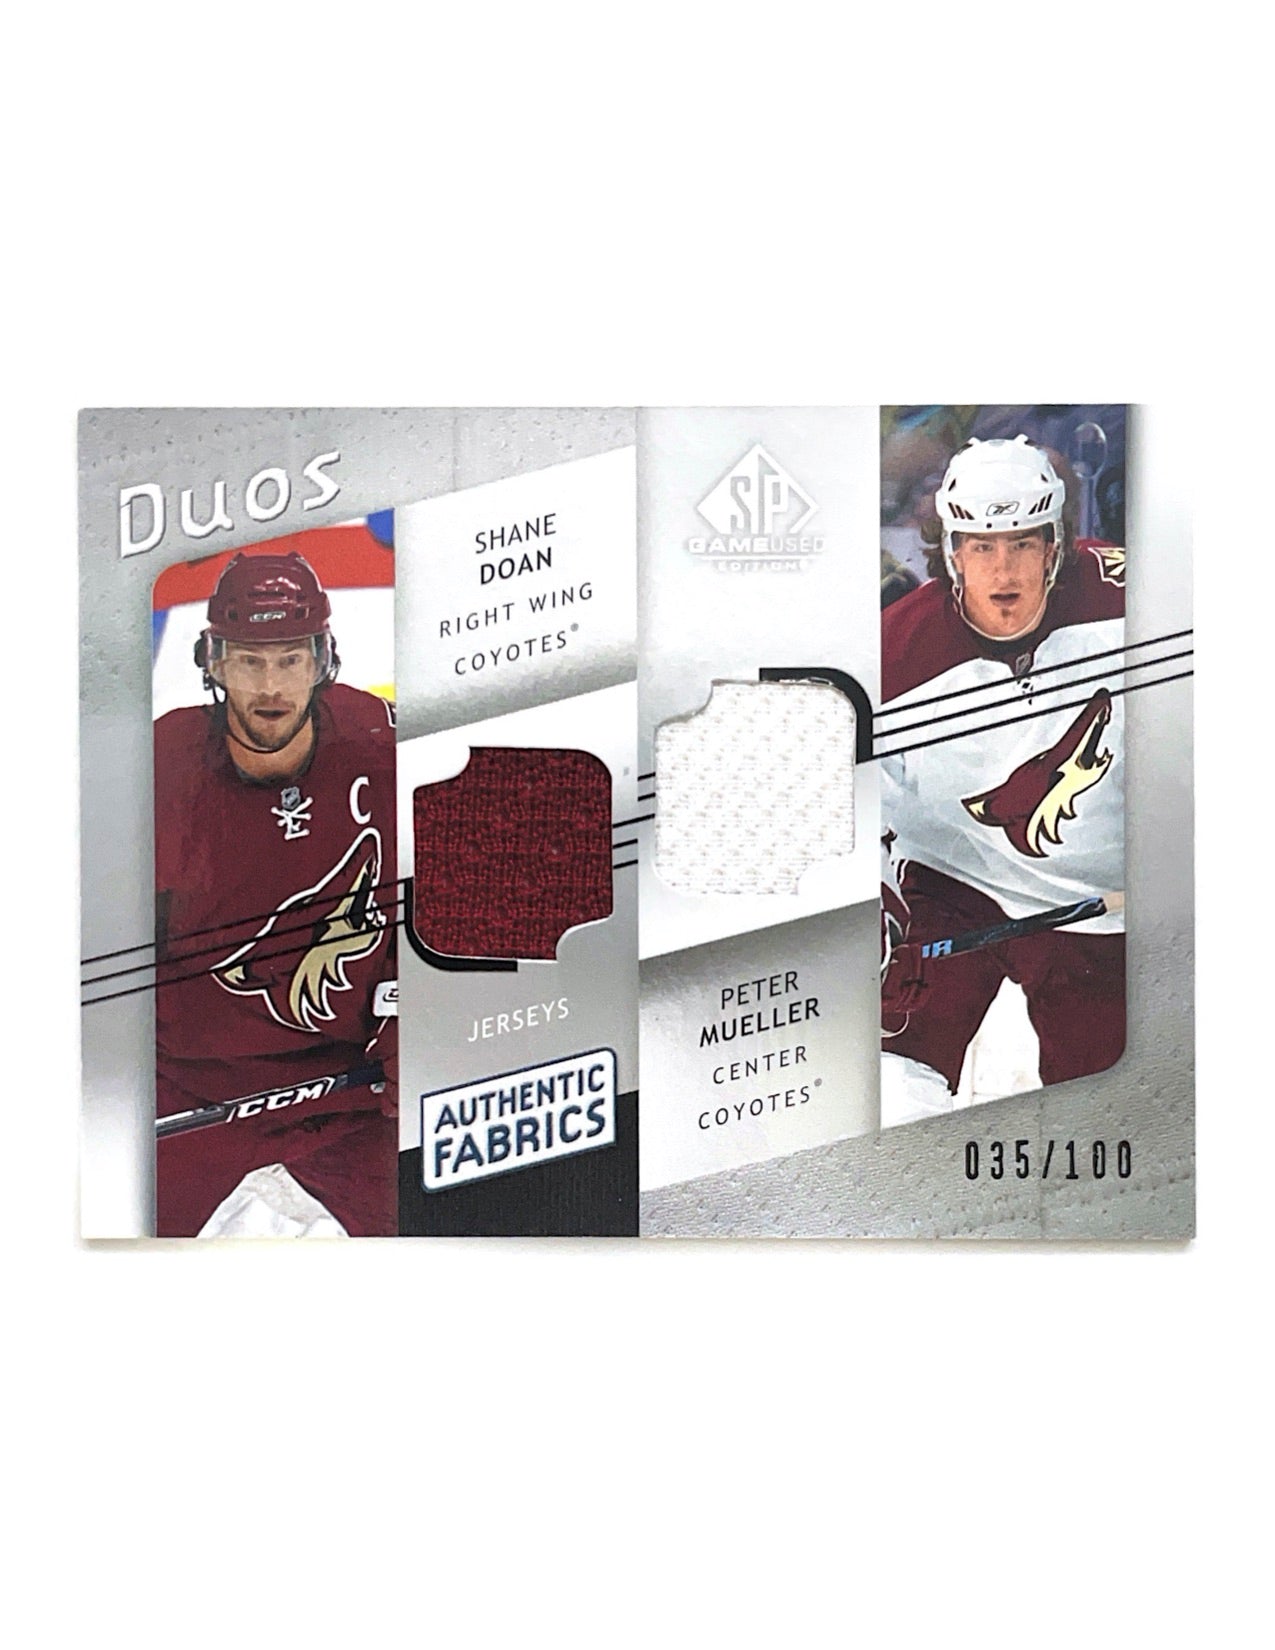 Shane Doan/Peter Mueller 2008-09 Upper Deck SP Game Used Authentic Fabrics Duos Jersey #AF2-SM